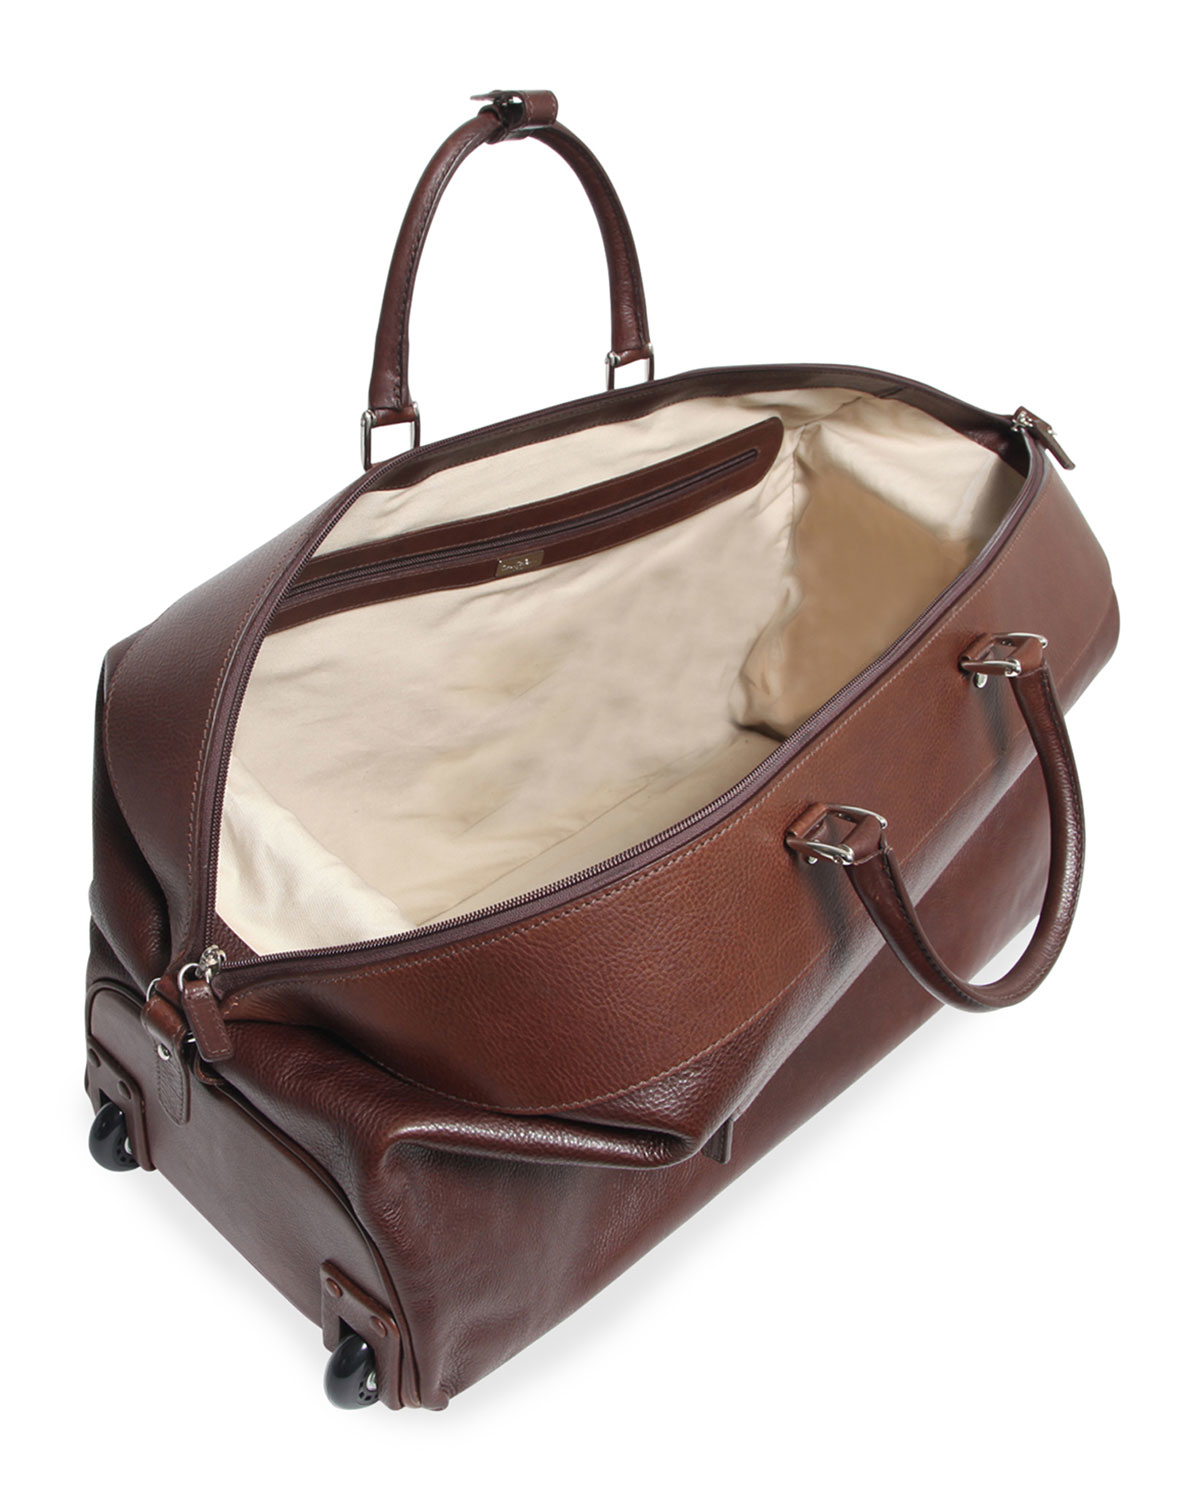 Lyst - T. Anthony Two-wheel Leather Carryon Duffel Bag in Brown for Men